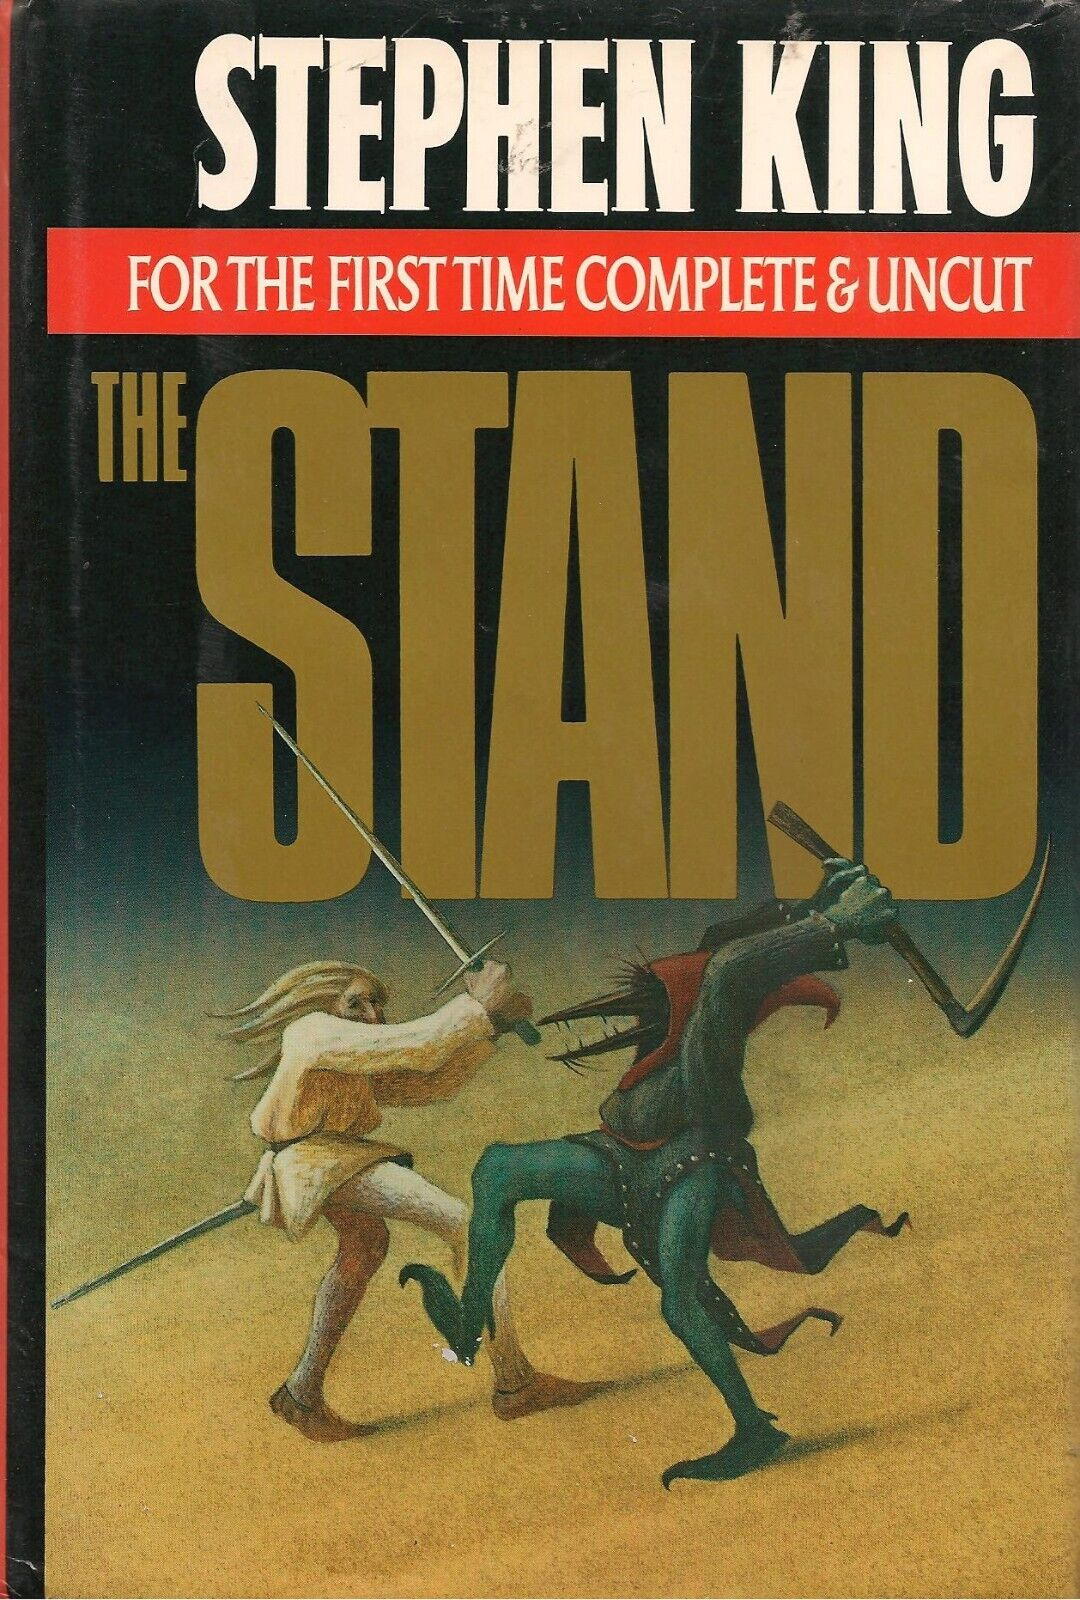 The-Stand-1990-book-cover-1080-1600.png